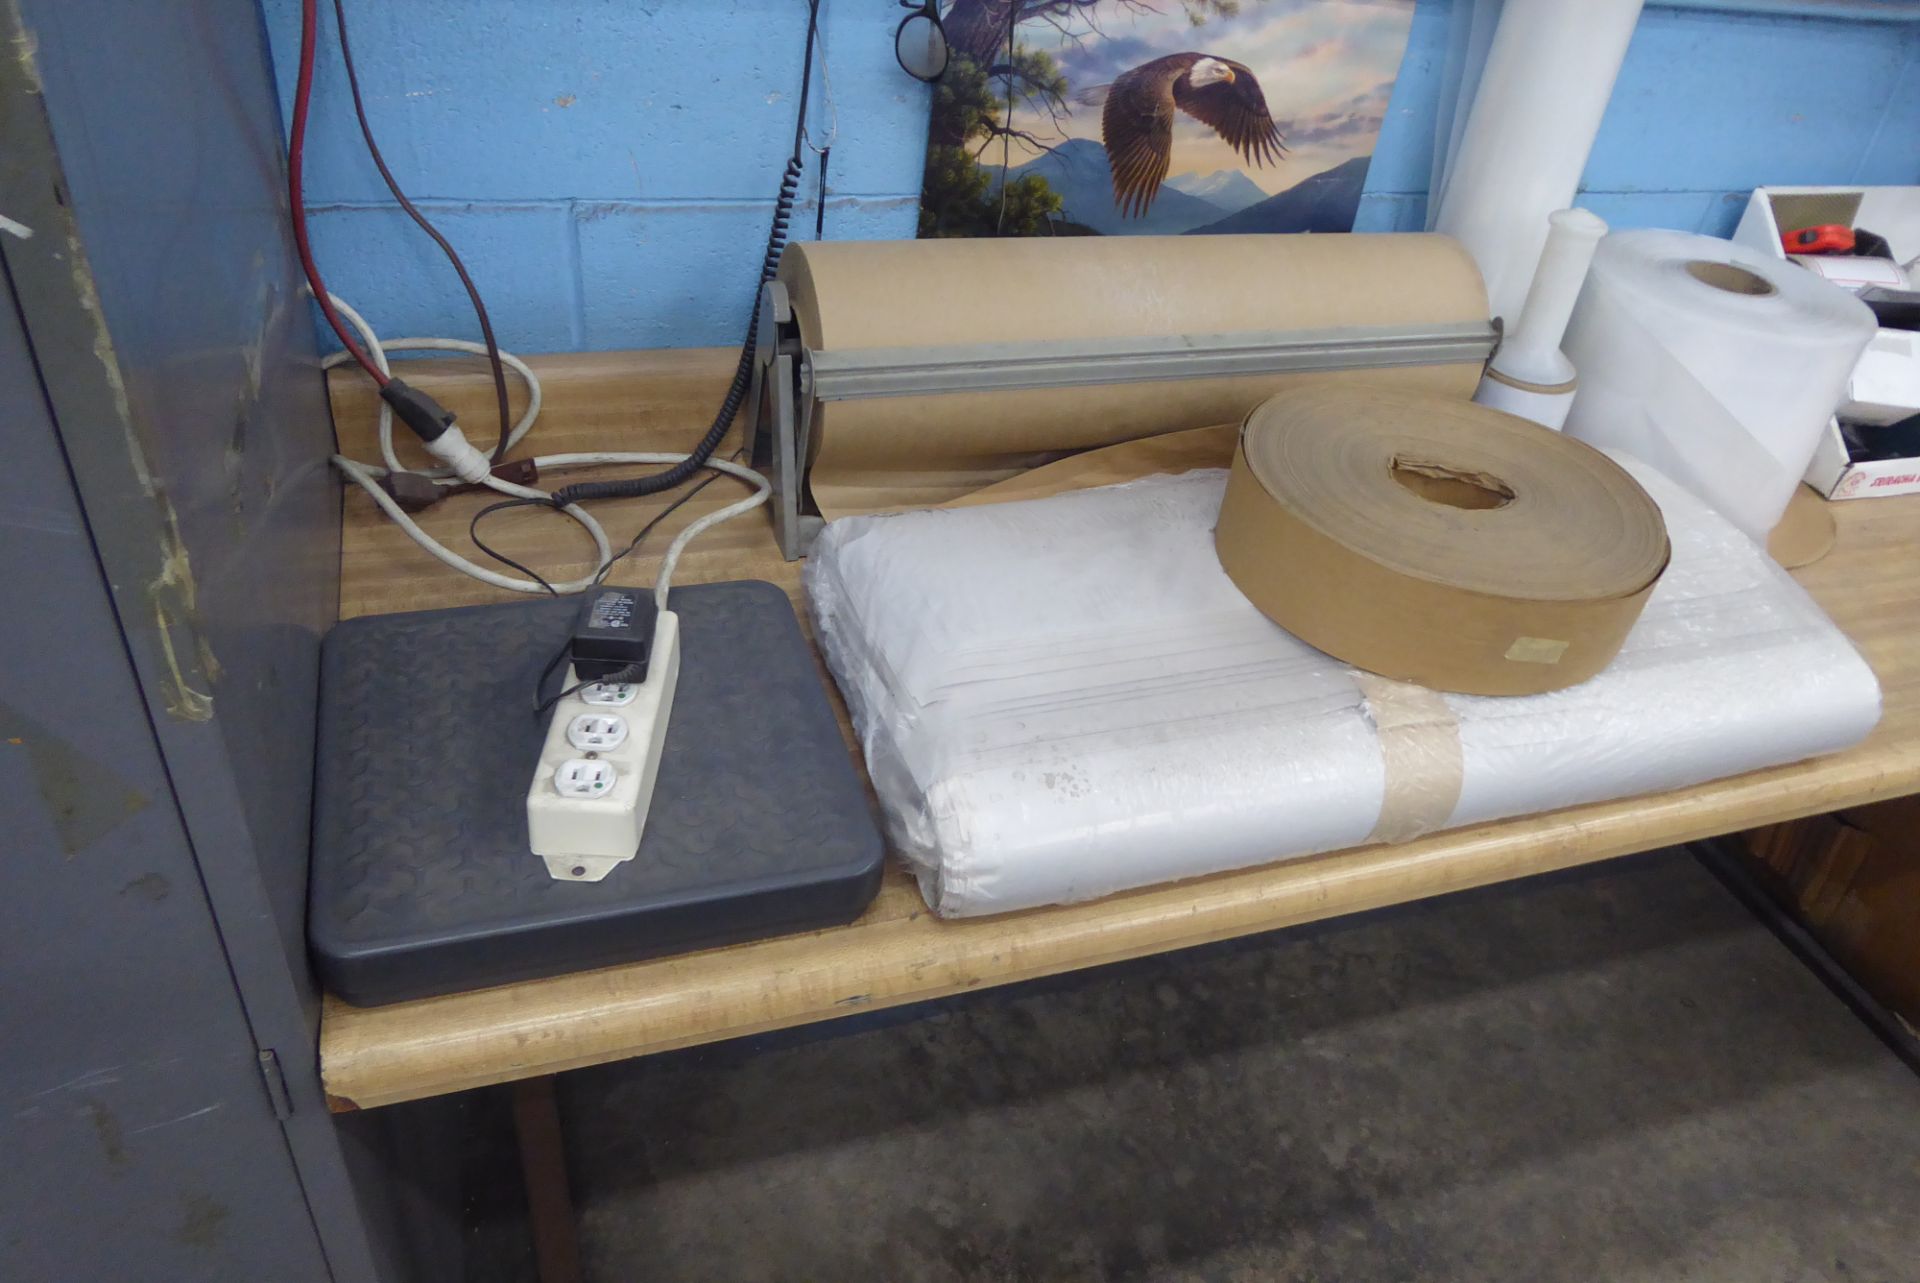 Shipping Tape, Shipping Scales, Shrink Wrap, Cabinet, Etc. - Image 2 of 4